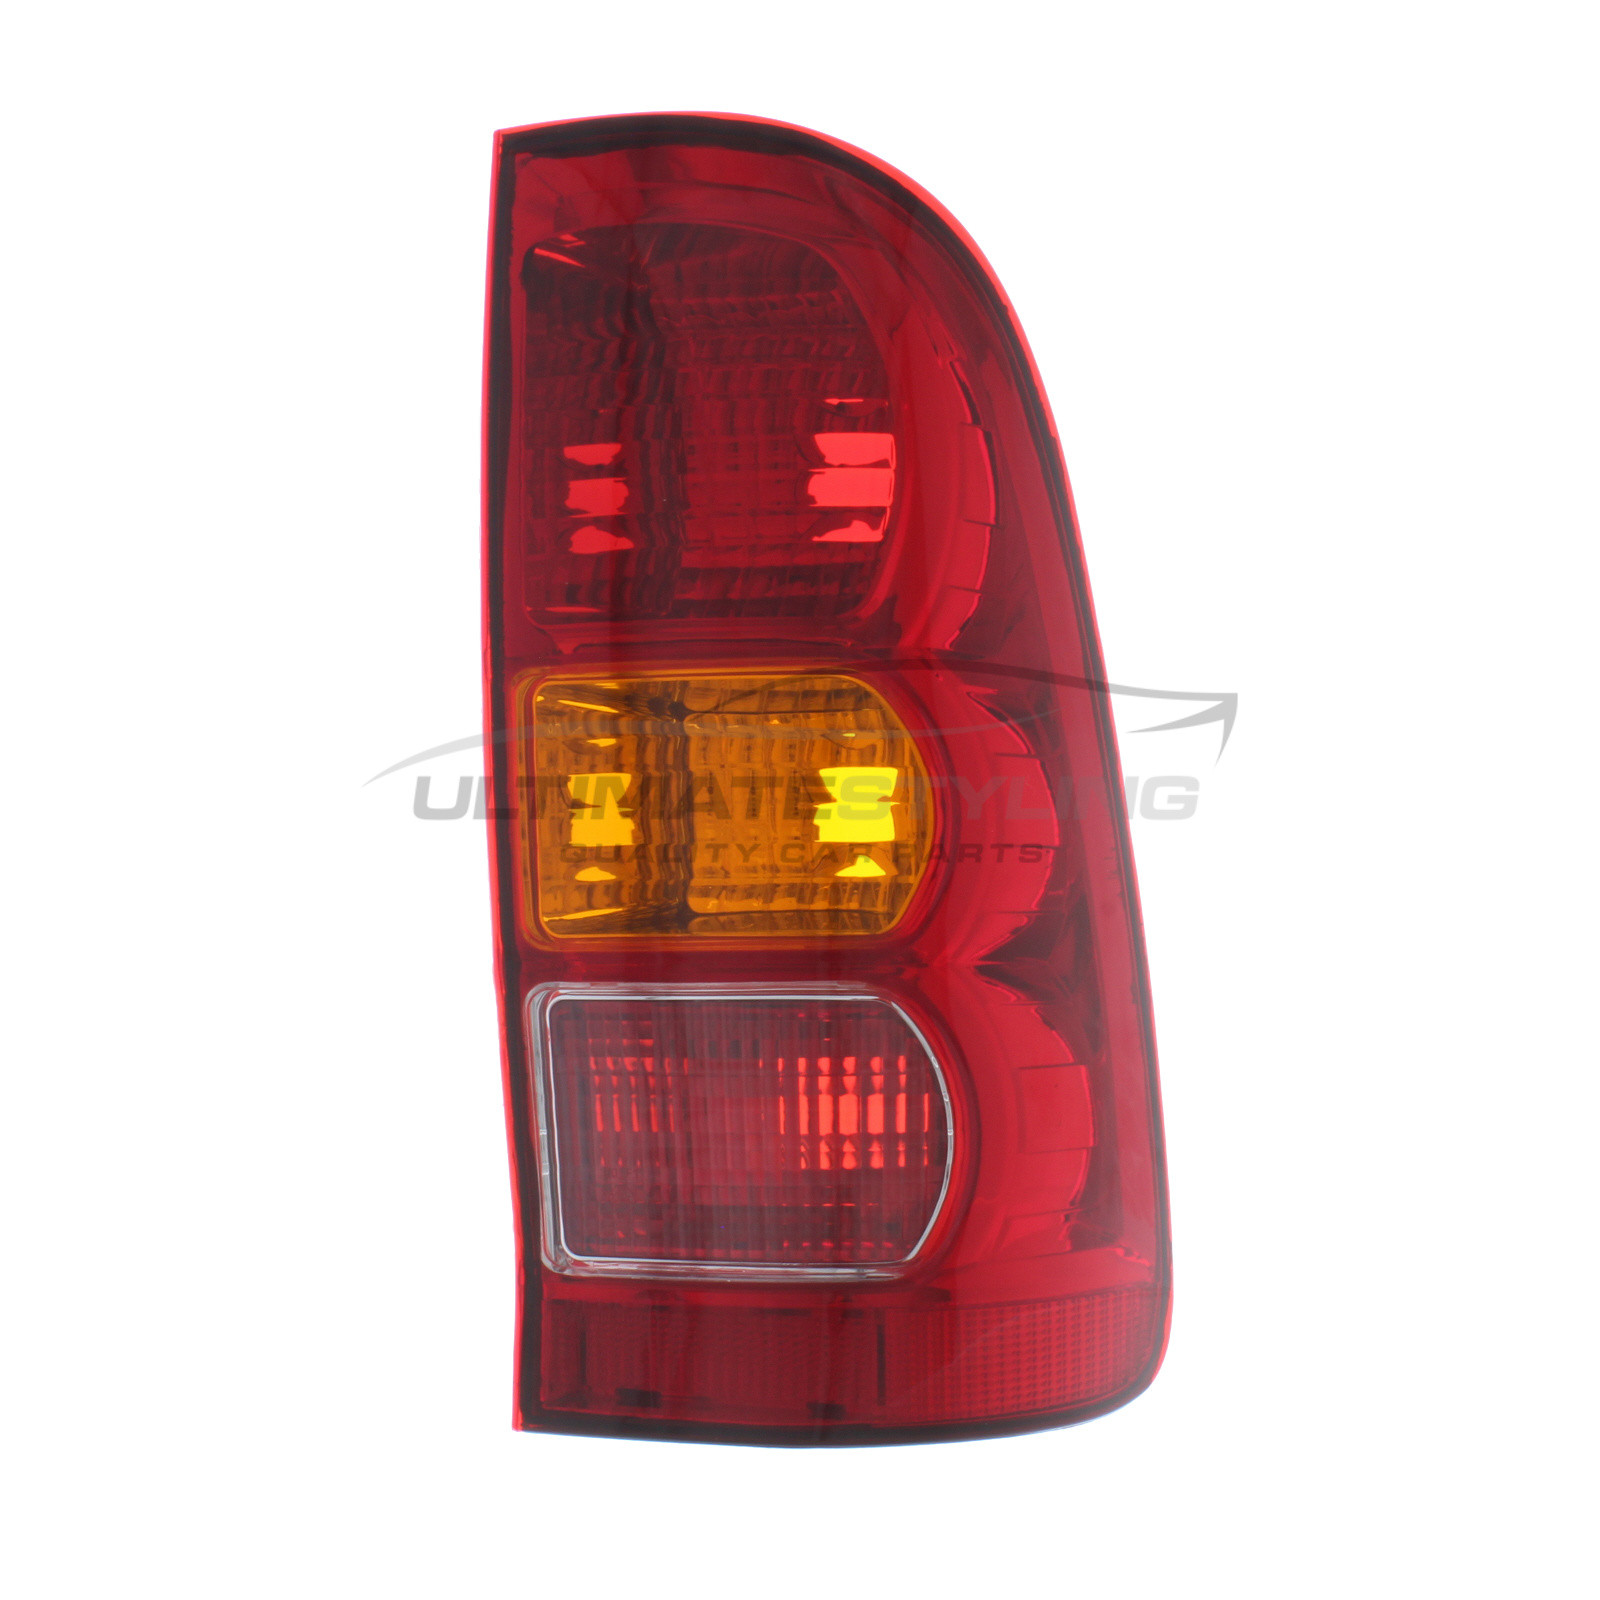 Toyota Hi-Lux 2005-2012 Non-LED Rear Light / Tail Light Excluding Bulb Holder Drivers Side (RH)